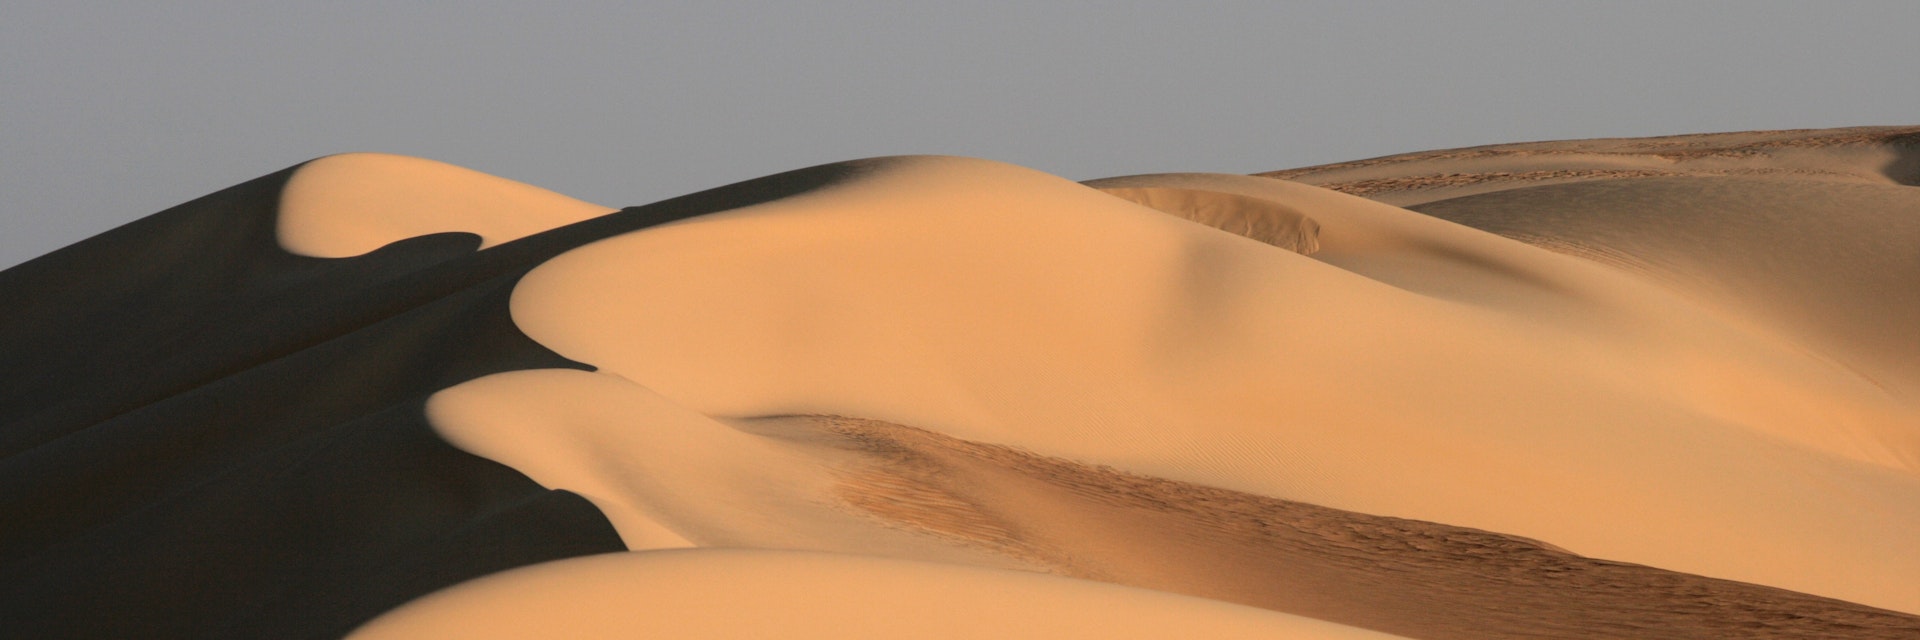 Dunes in the great sand sea in Egypt.